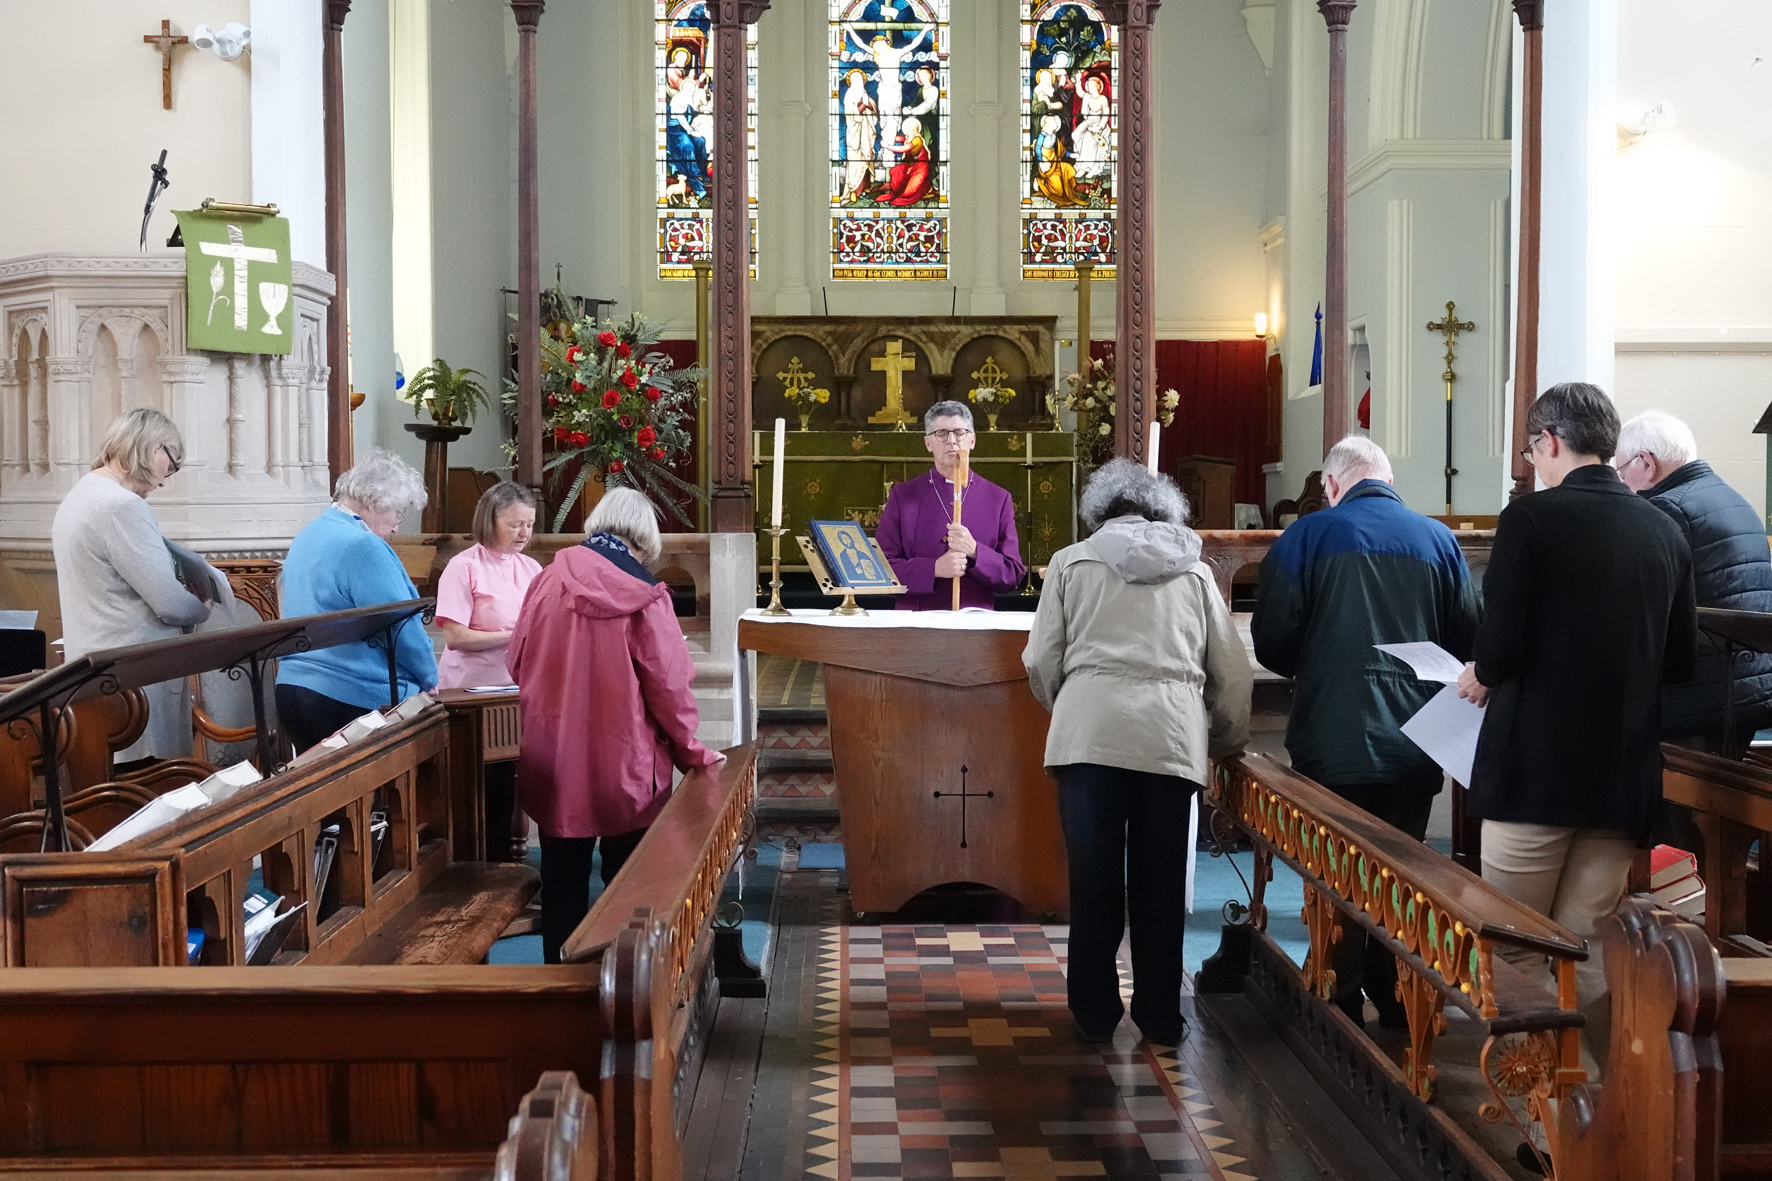 Praying at the altar in st clement's church in Worcester